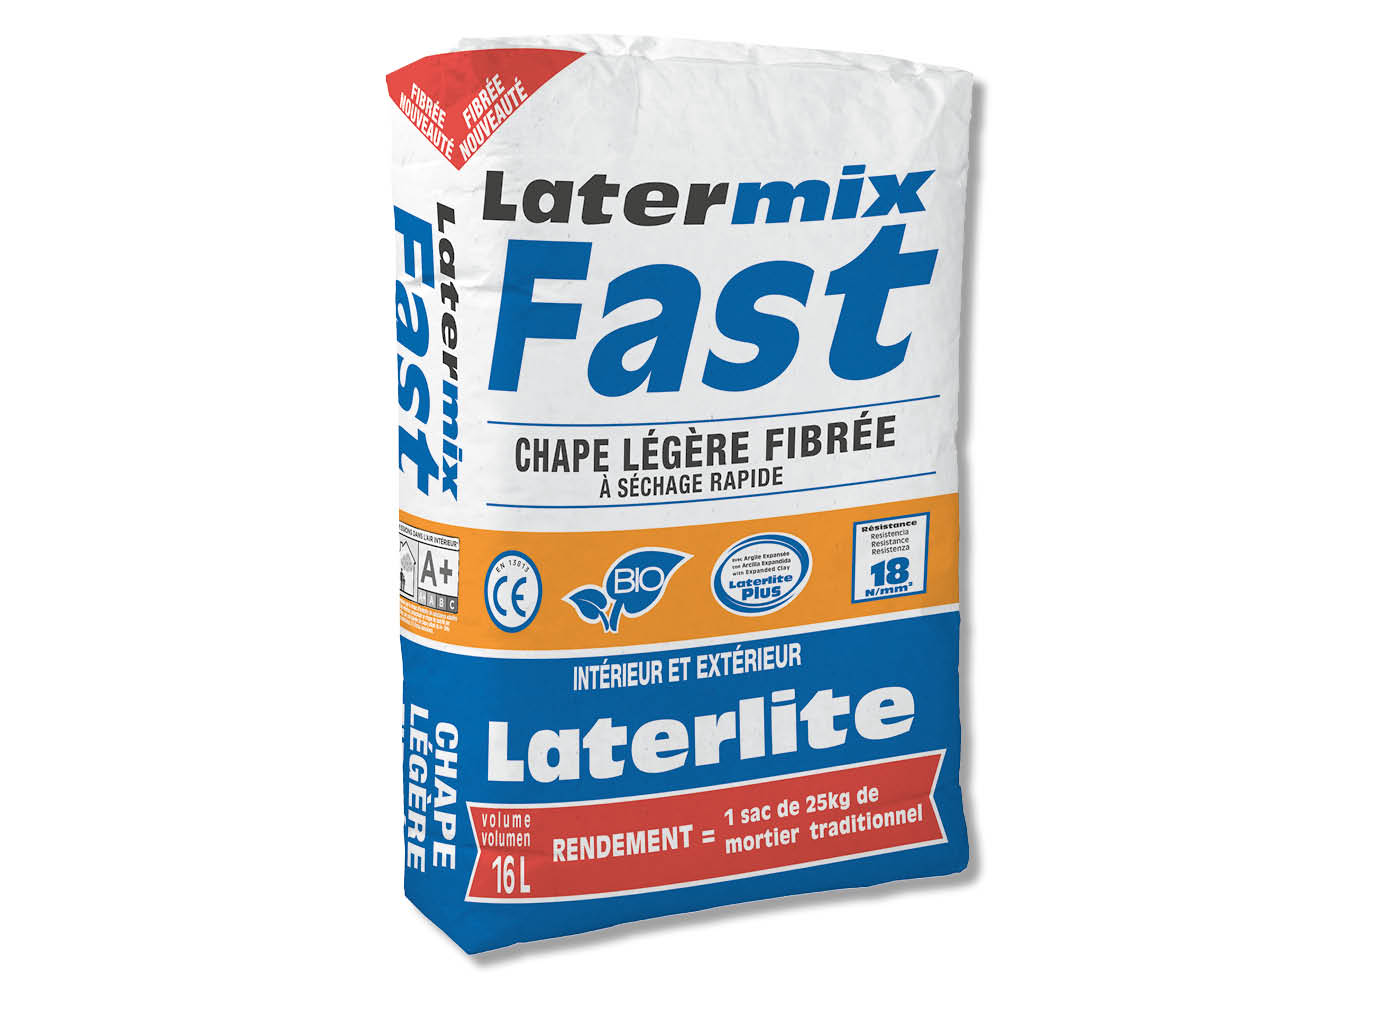 P12-latermix-fast-FR